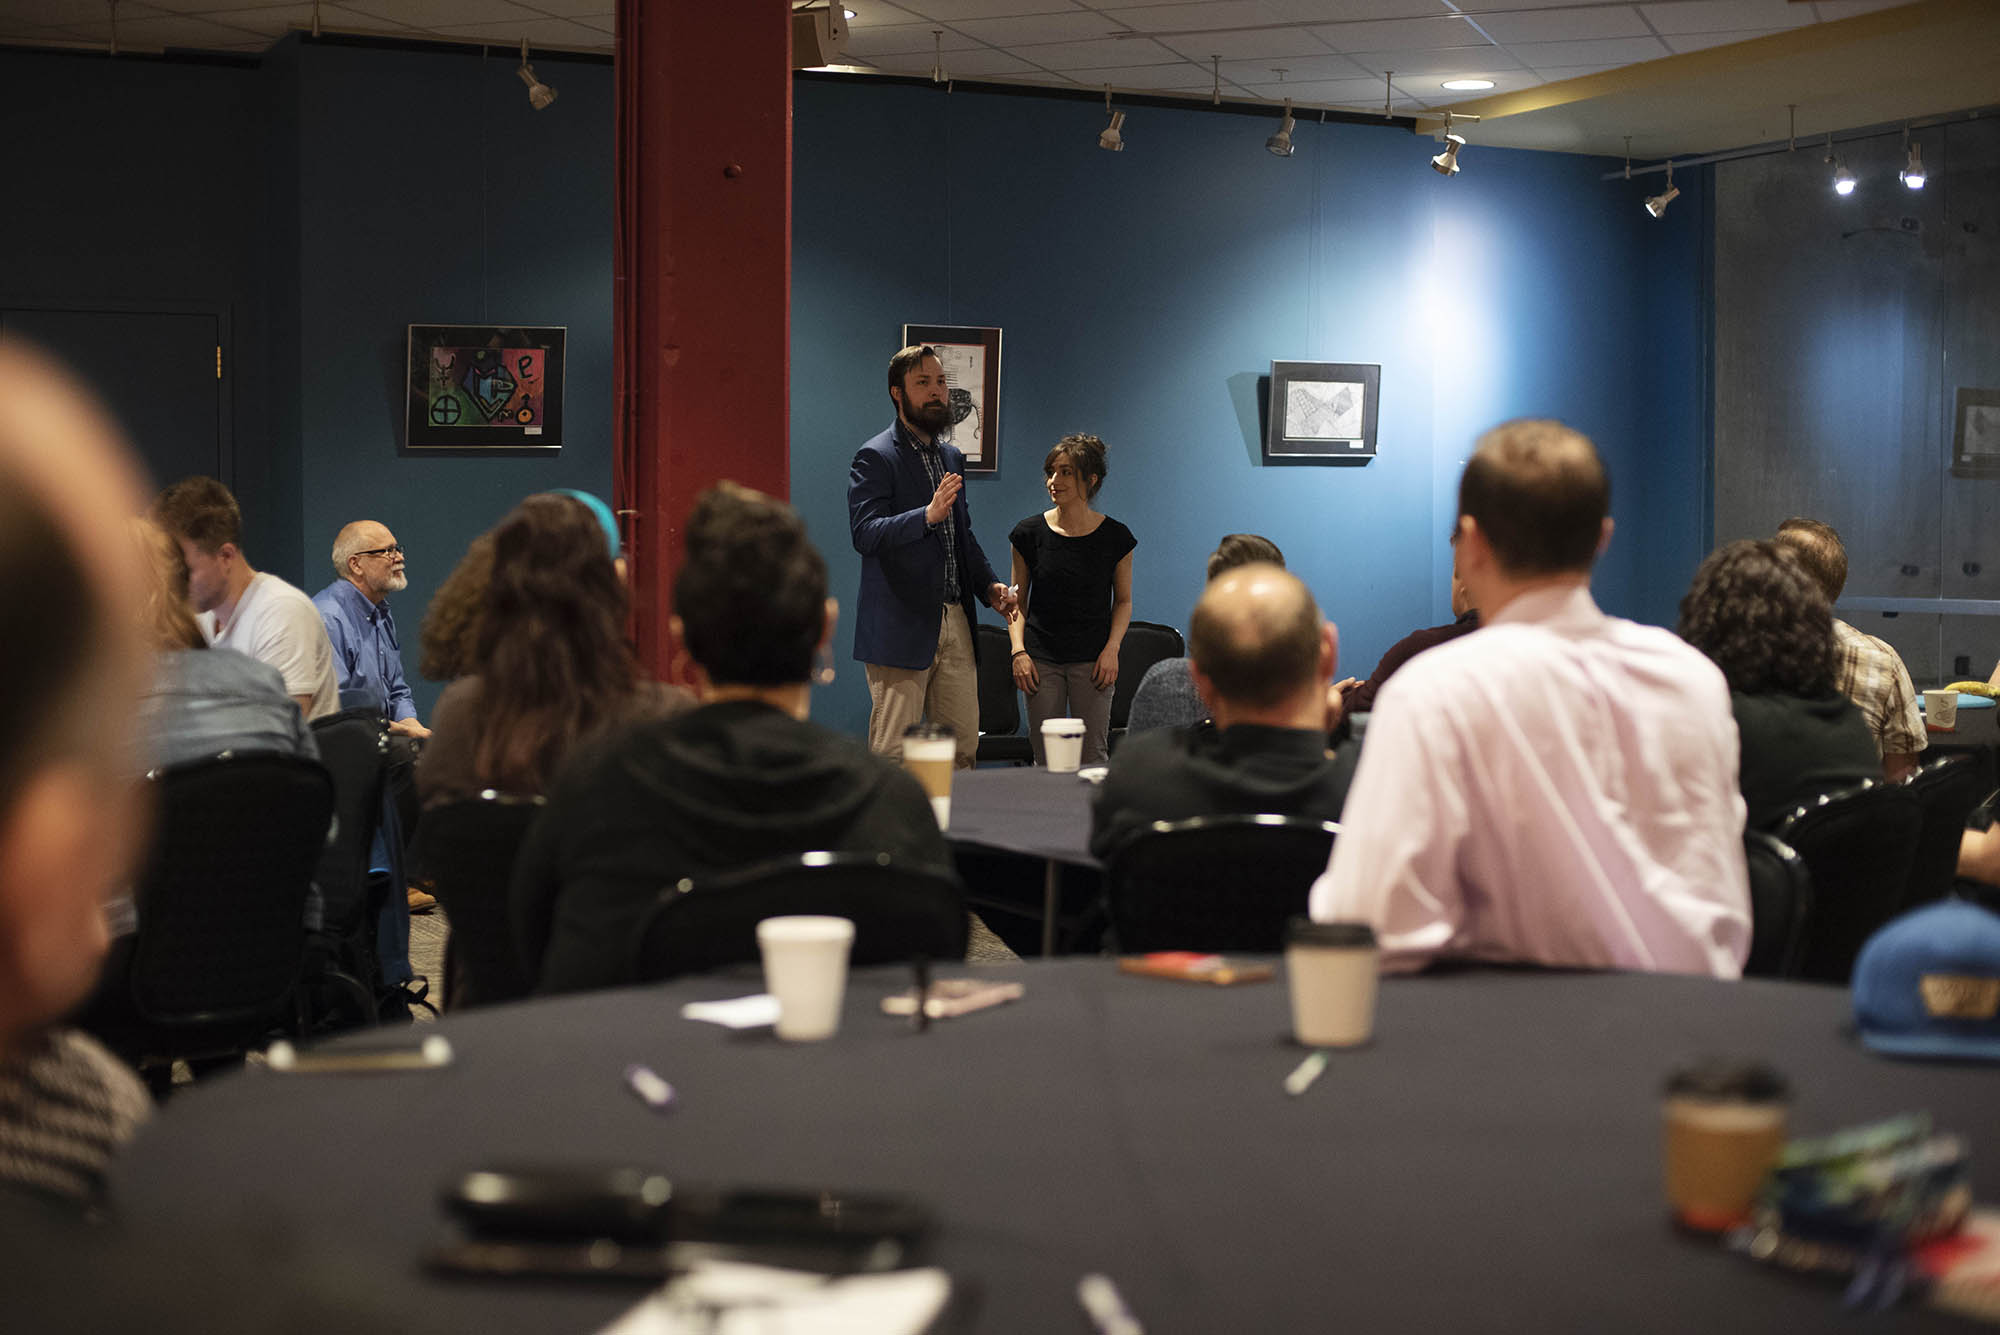 Conference goers meet in the Fenimore Gallery during TM3, Theatre Manager Third National Conference, at Proctors in Schenectady Thursday, May 3, 2018.